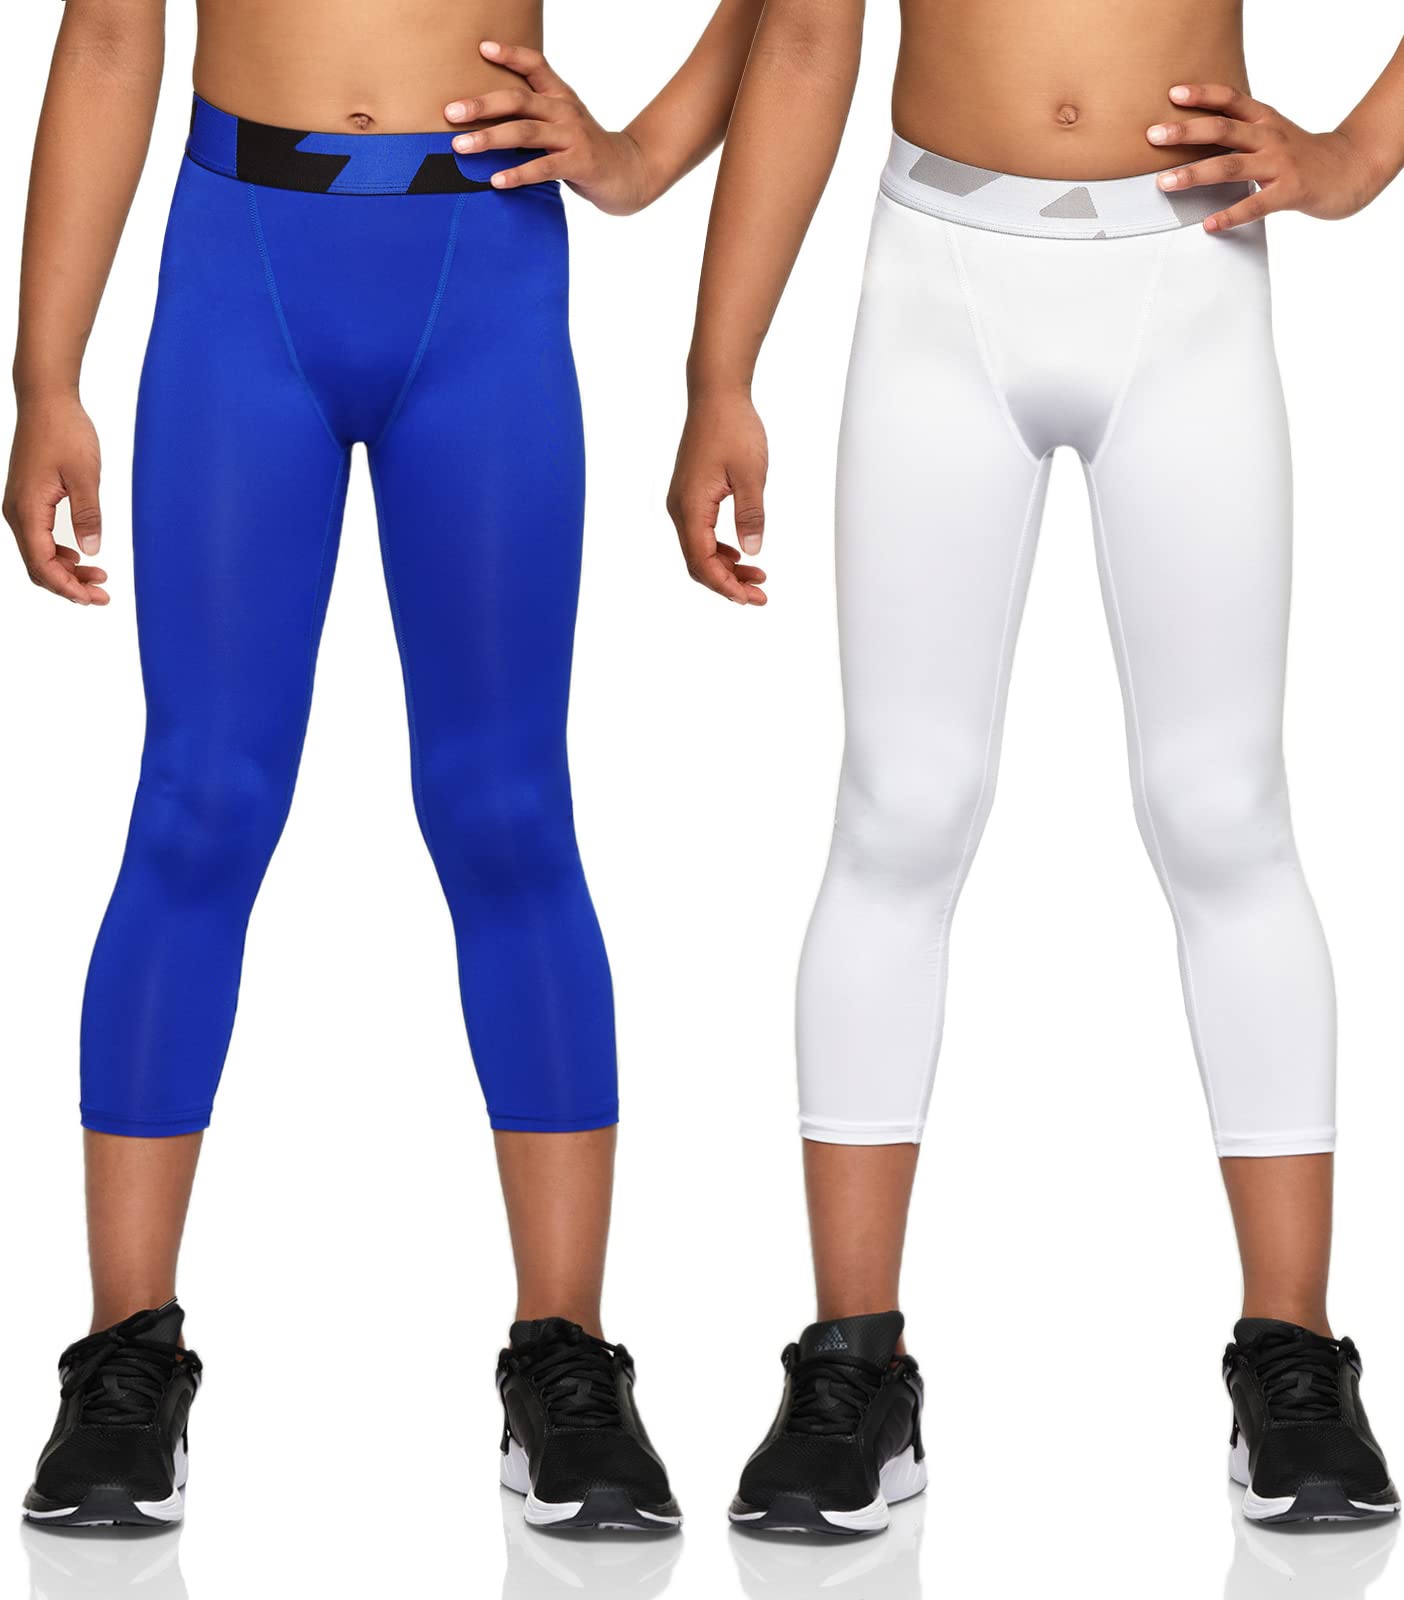 TSLA 1 or 2 Pack Boys Youth UPF 50+ Compression Pants Baselayer Cool Dry  Running Tights 4-Way Stretch Workout Leggings Capri 2pack White/ Blue 6